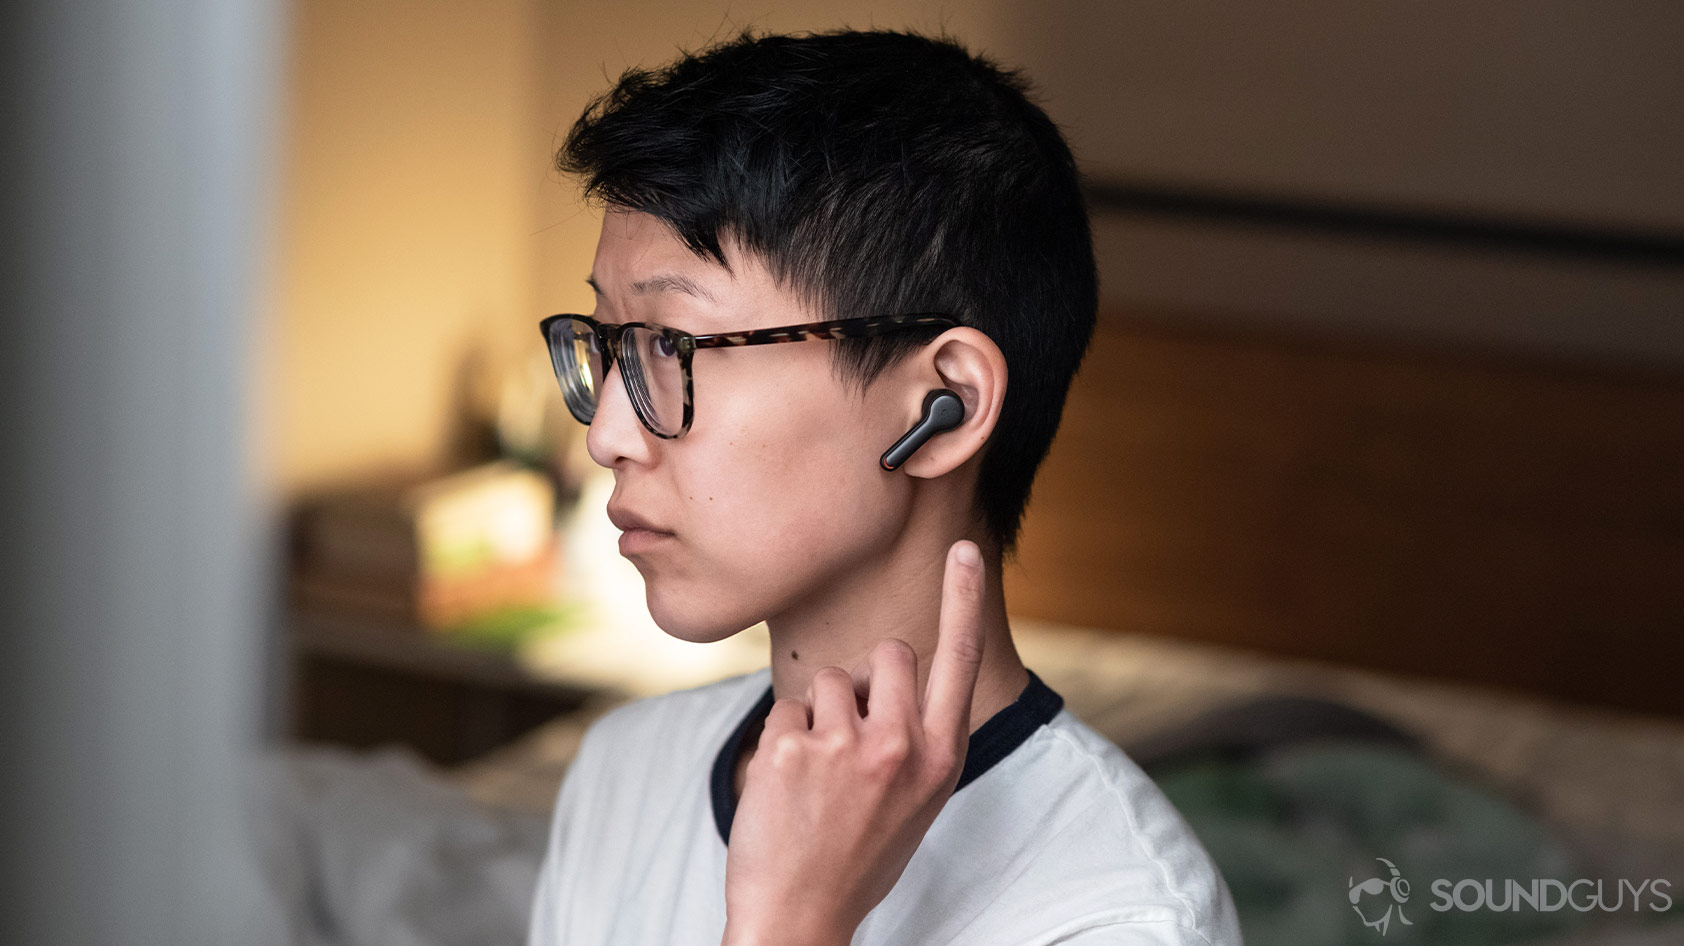 A photo of the Anker SoundCore Liberty Air 2, which is a better value than the Edifier TWS6, being worn and used by a woman in profile view.